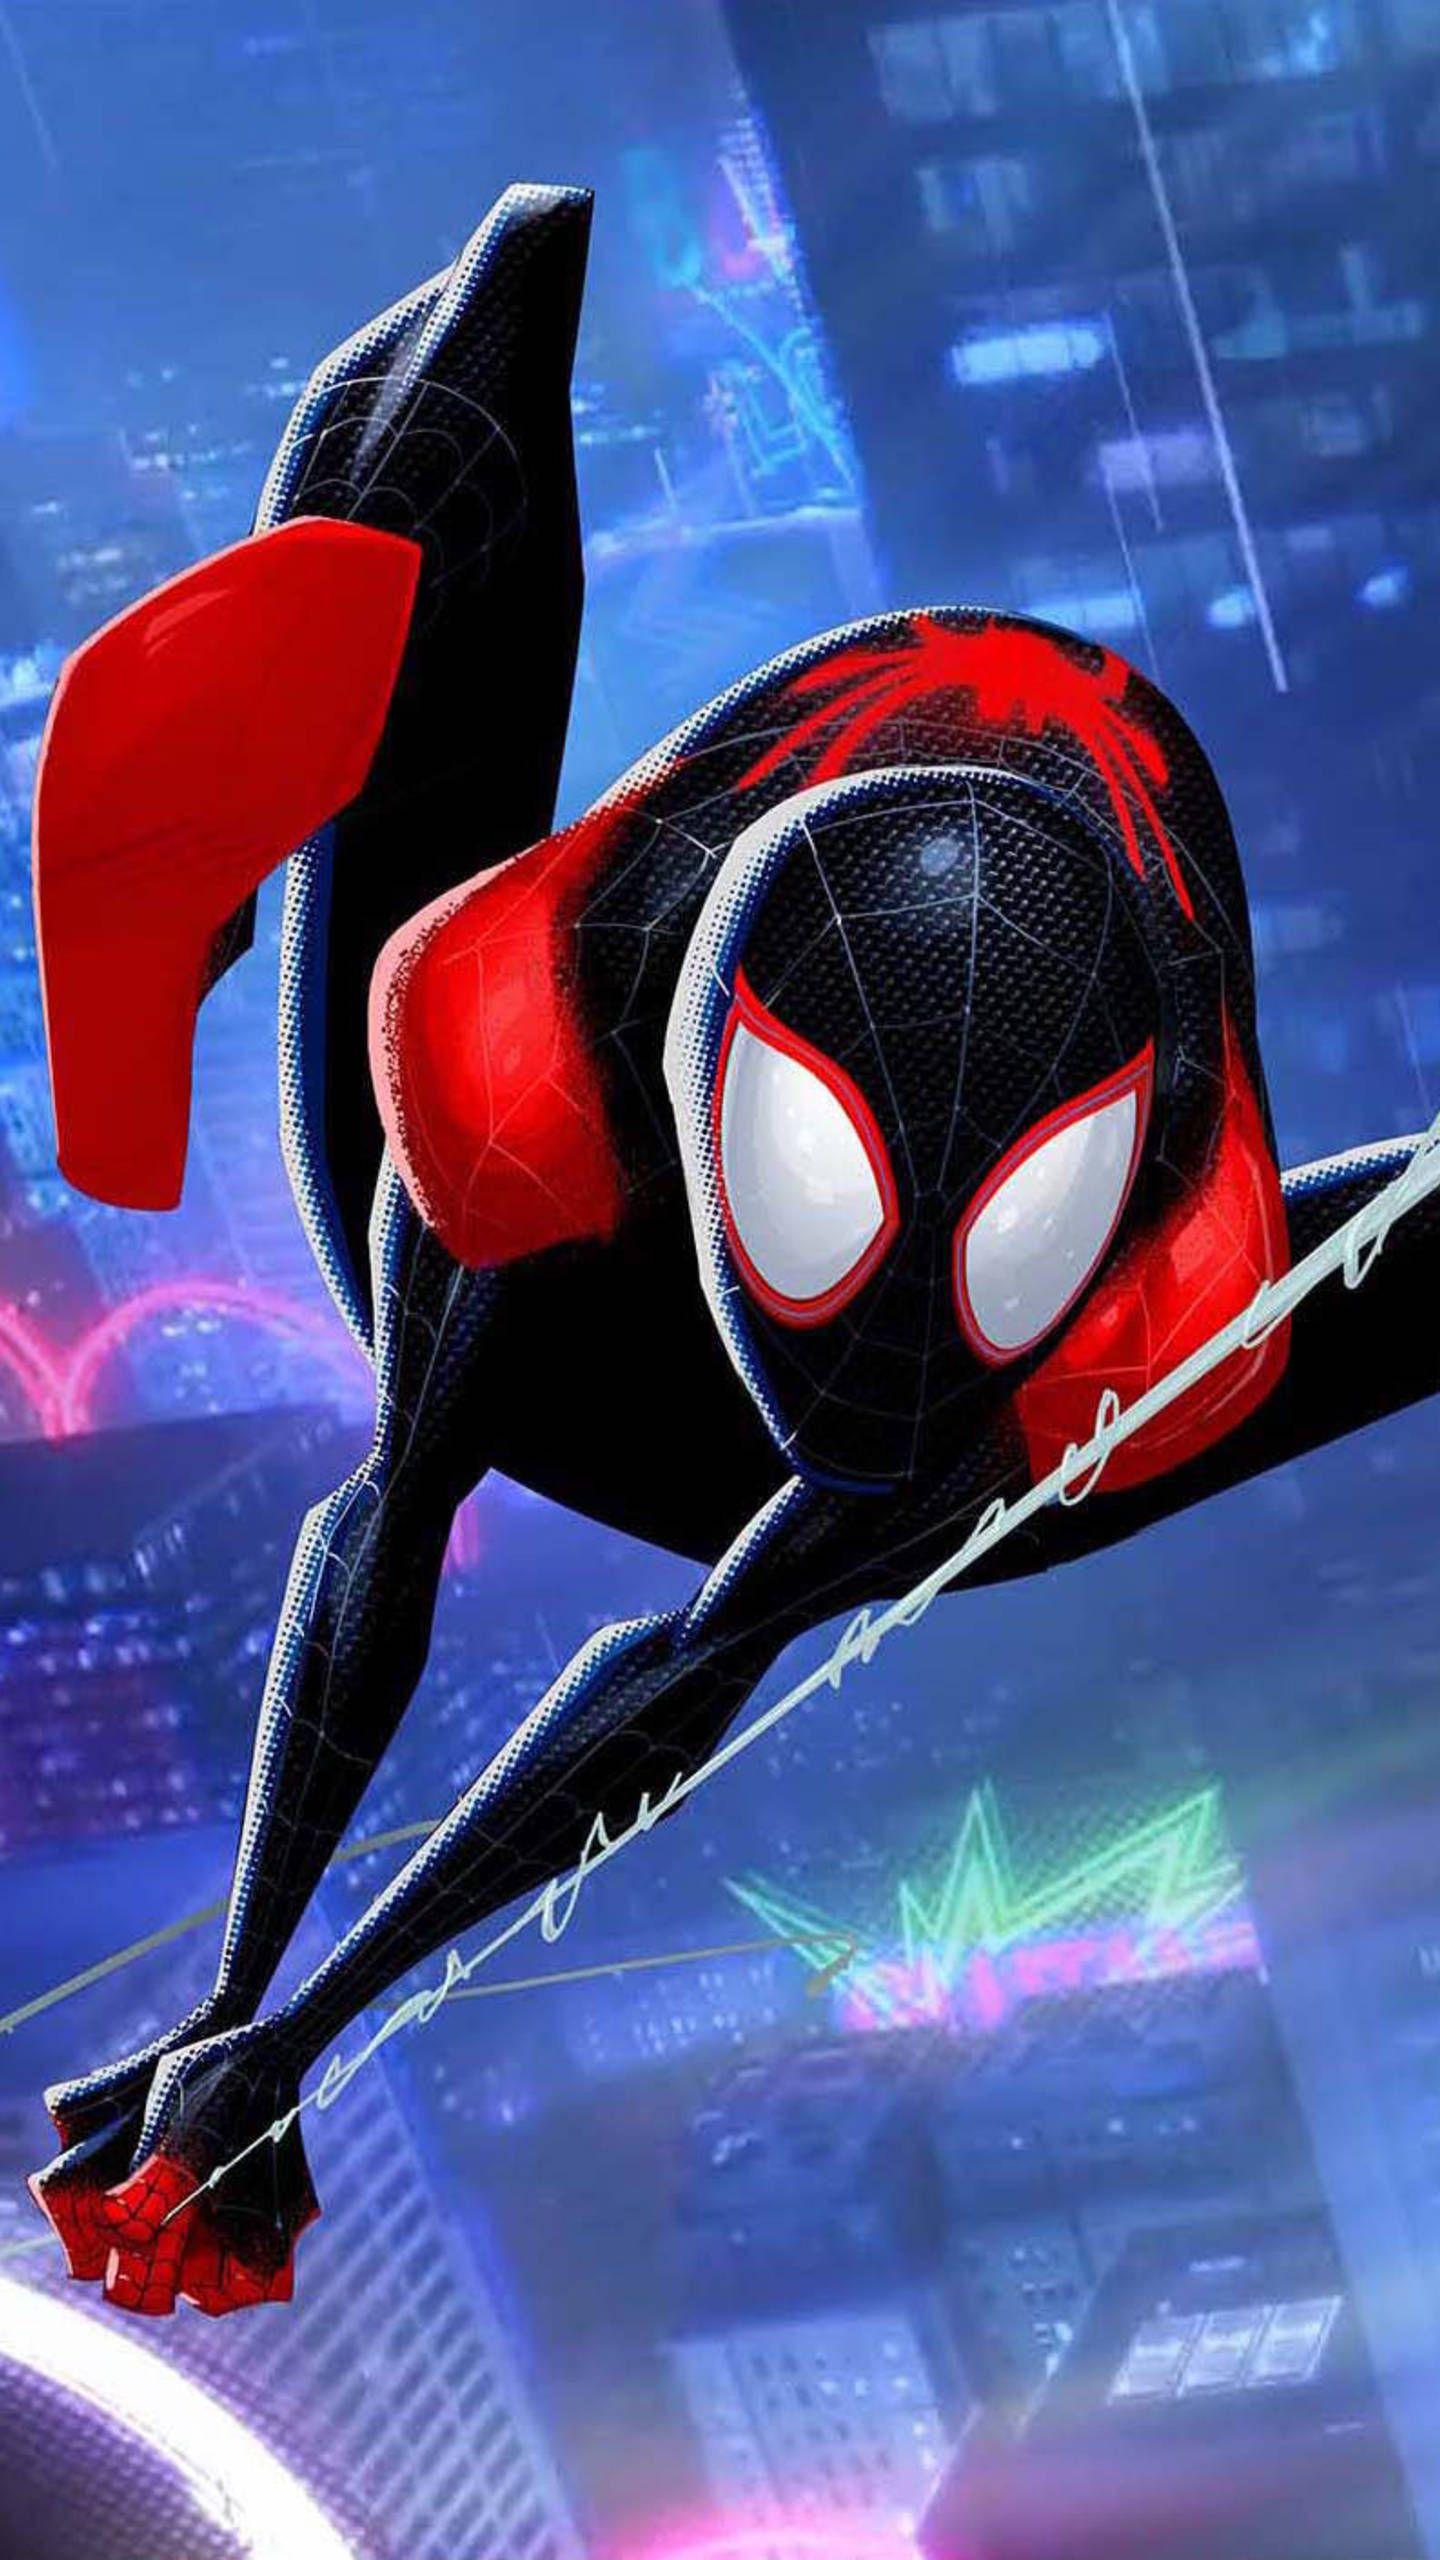 Spiderman: Into The Spiderverse Wallpaper. Spiderman, Ultimate spiderman, Marvel comics wallpaper